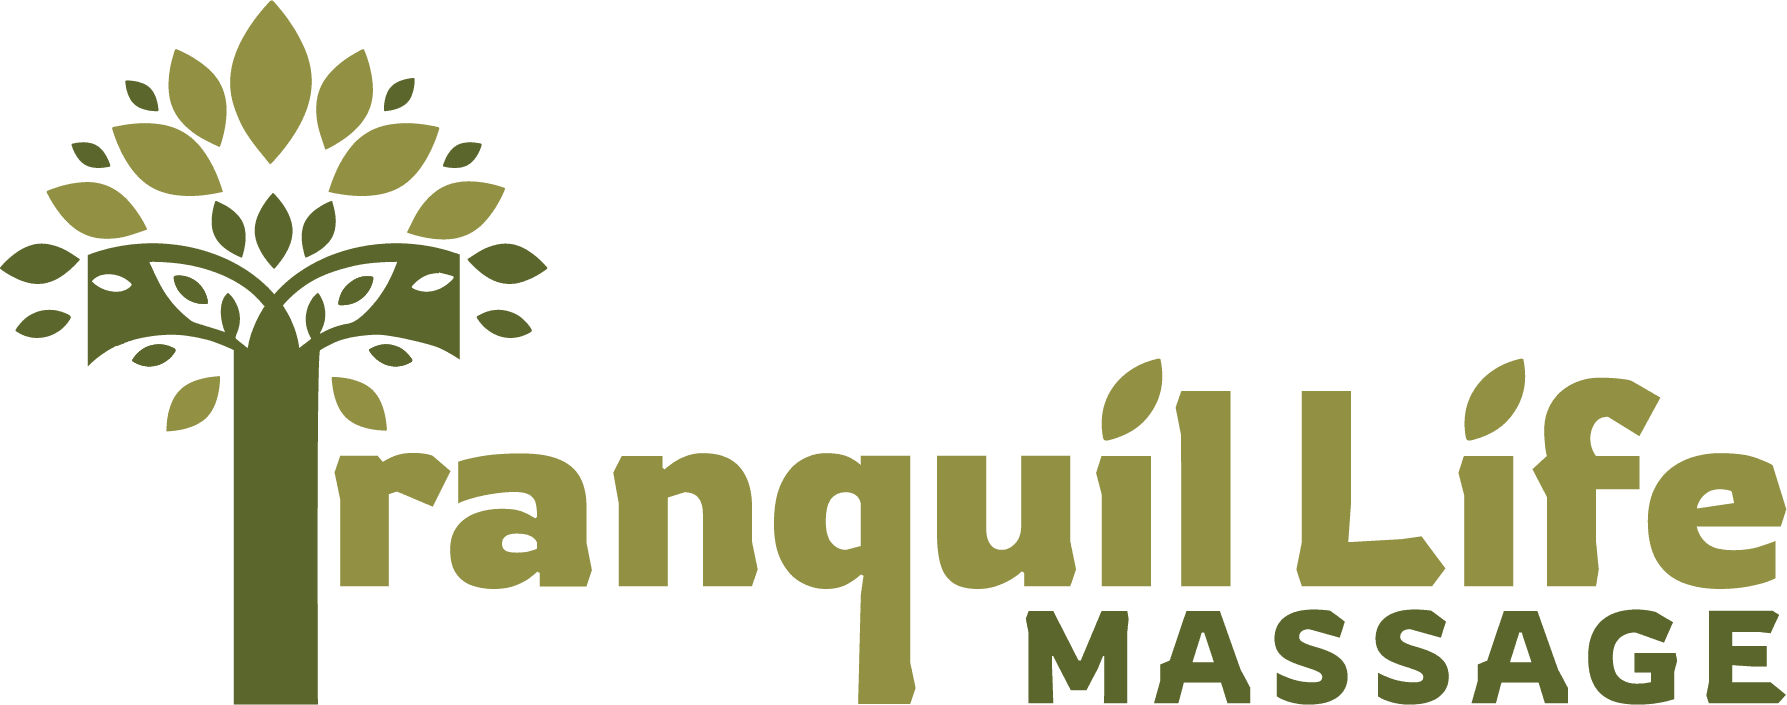 A green banner with the word tranquillo made in yellow letters.